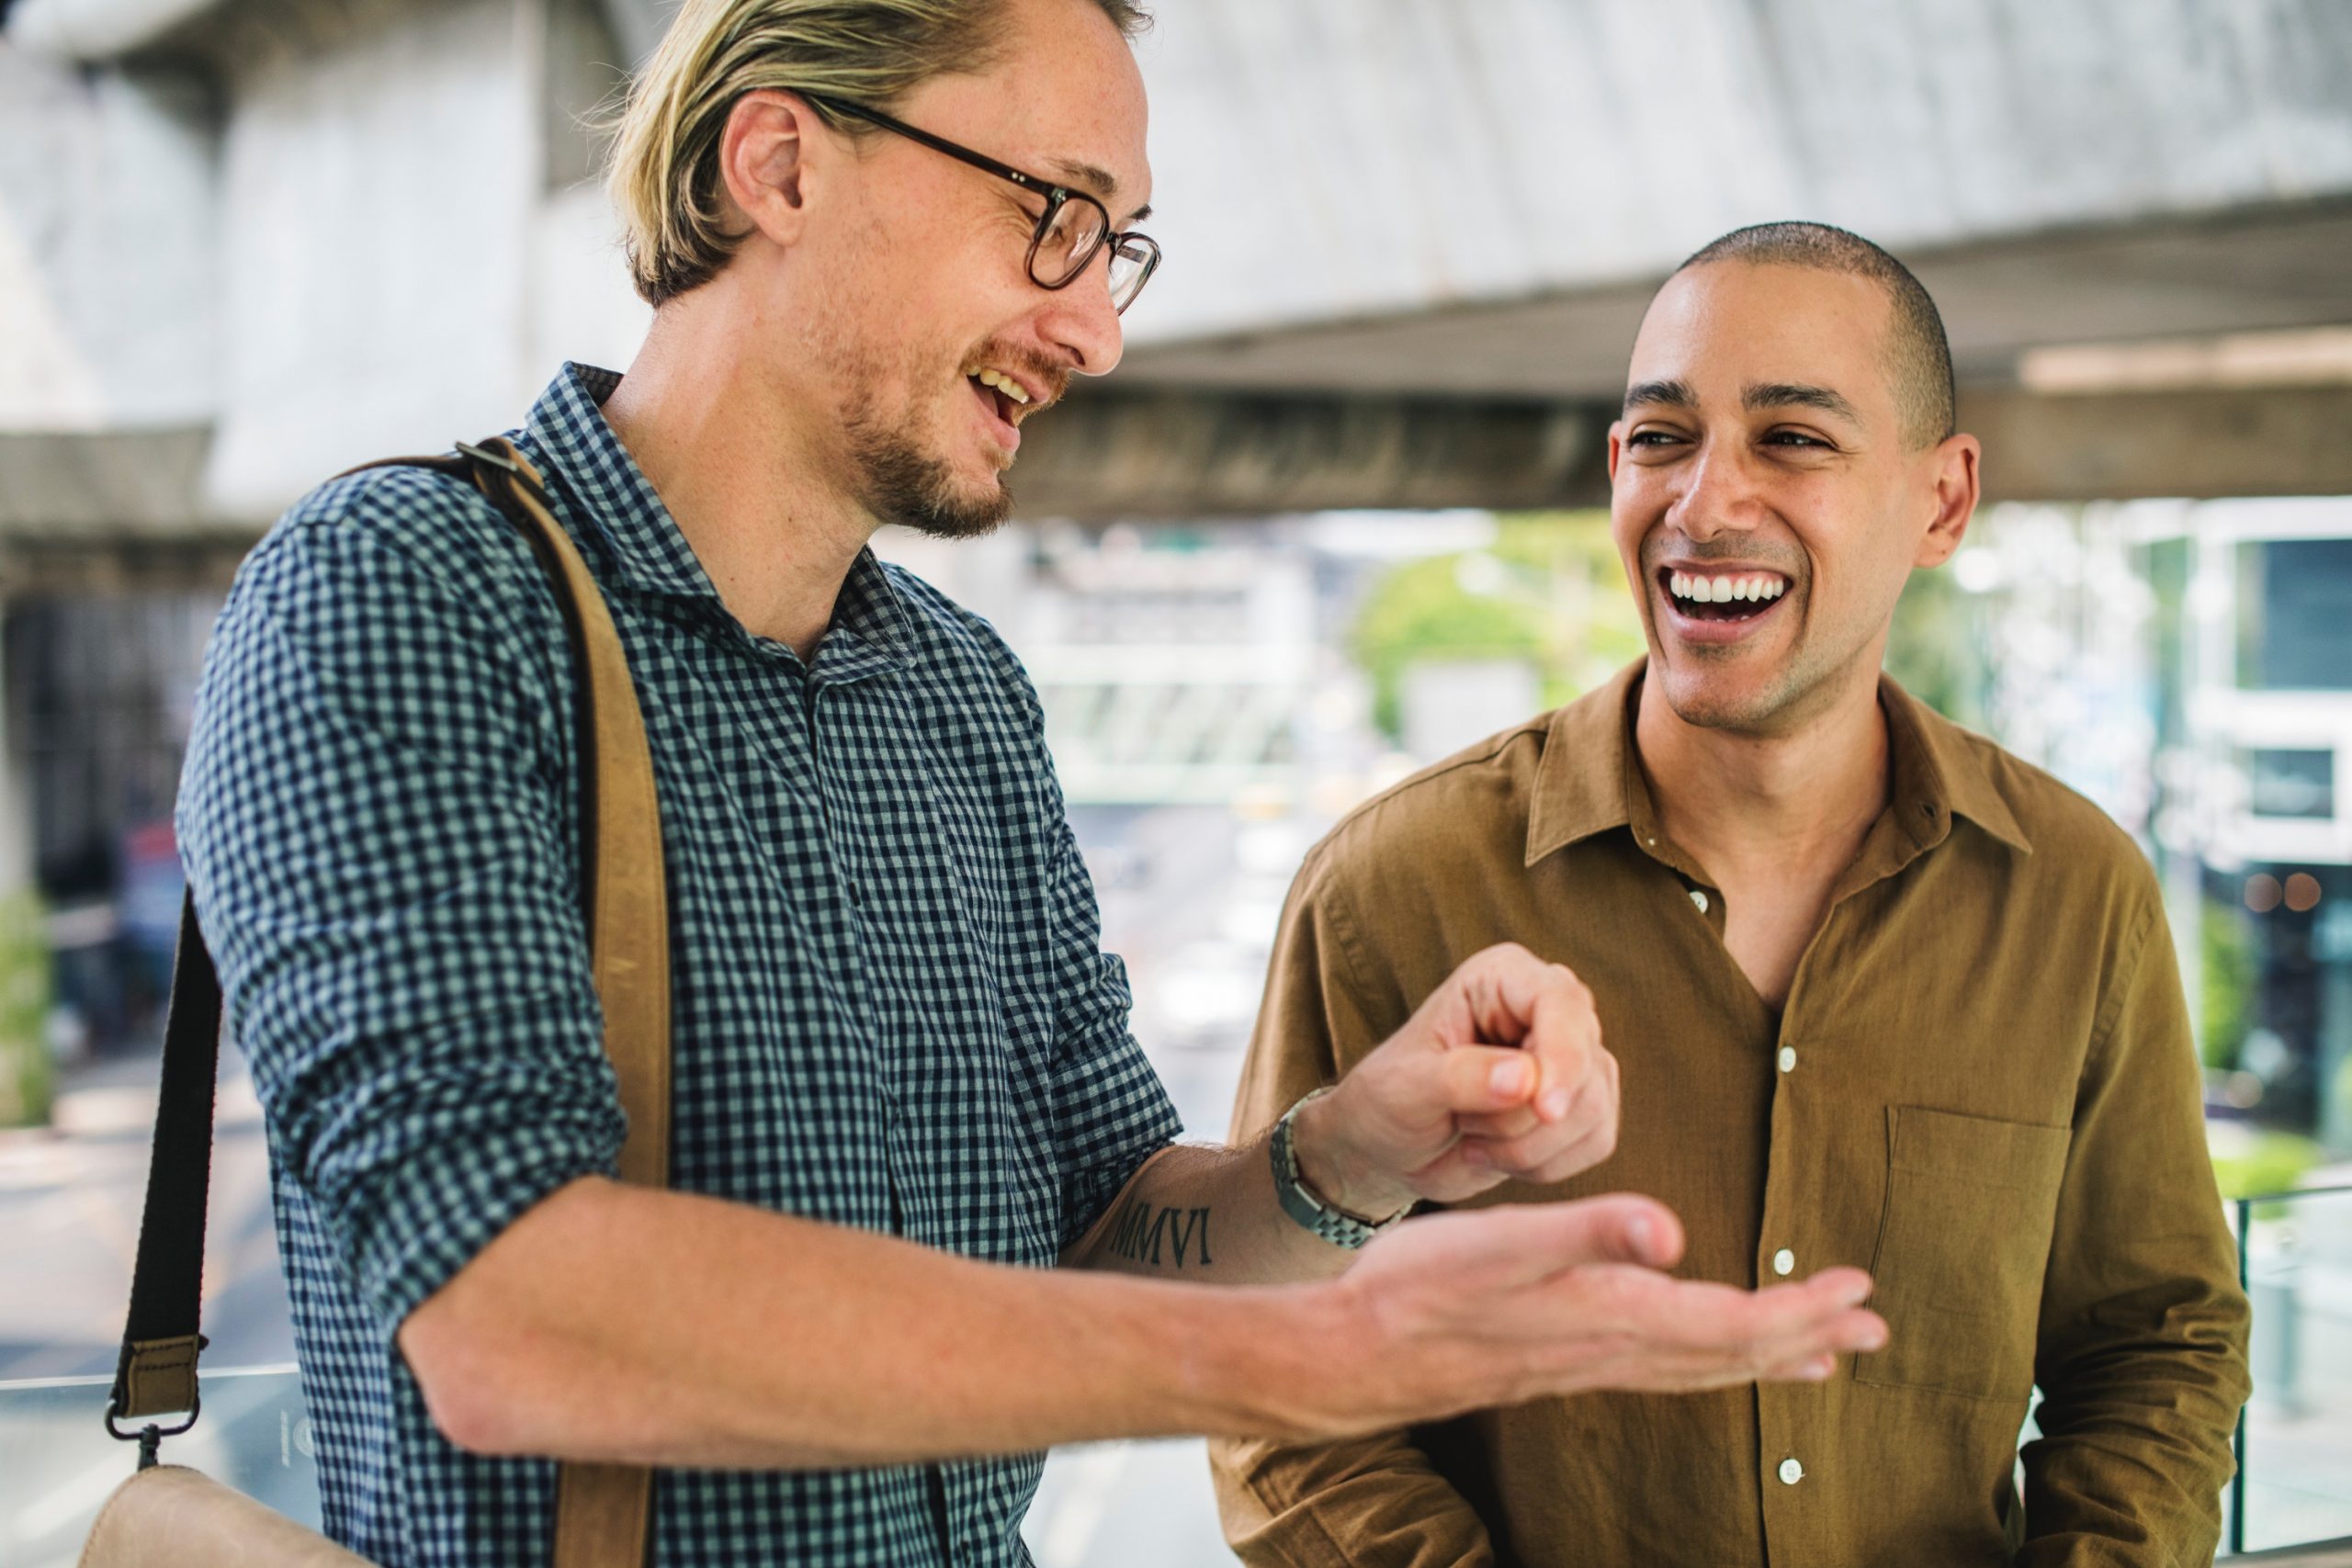 Two professionals laughing and sharing a fist bump in an urban setting.